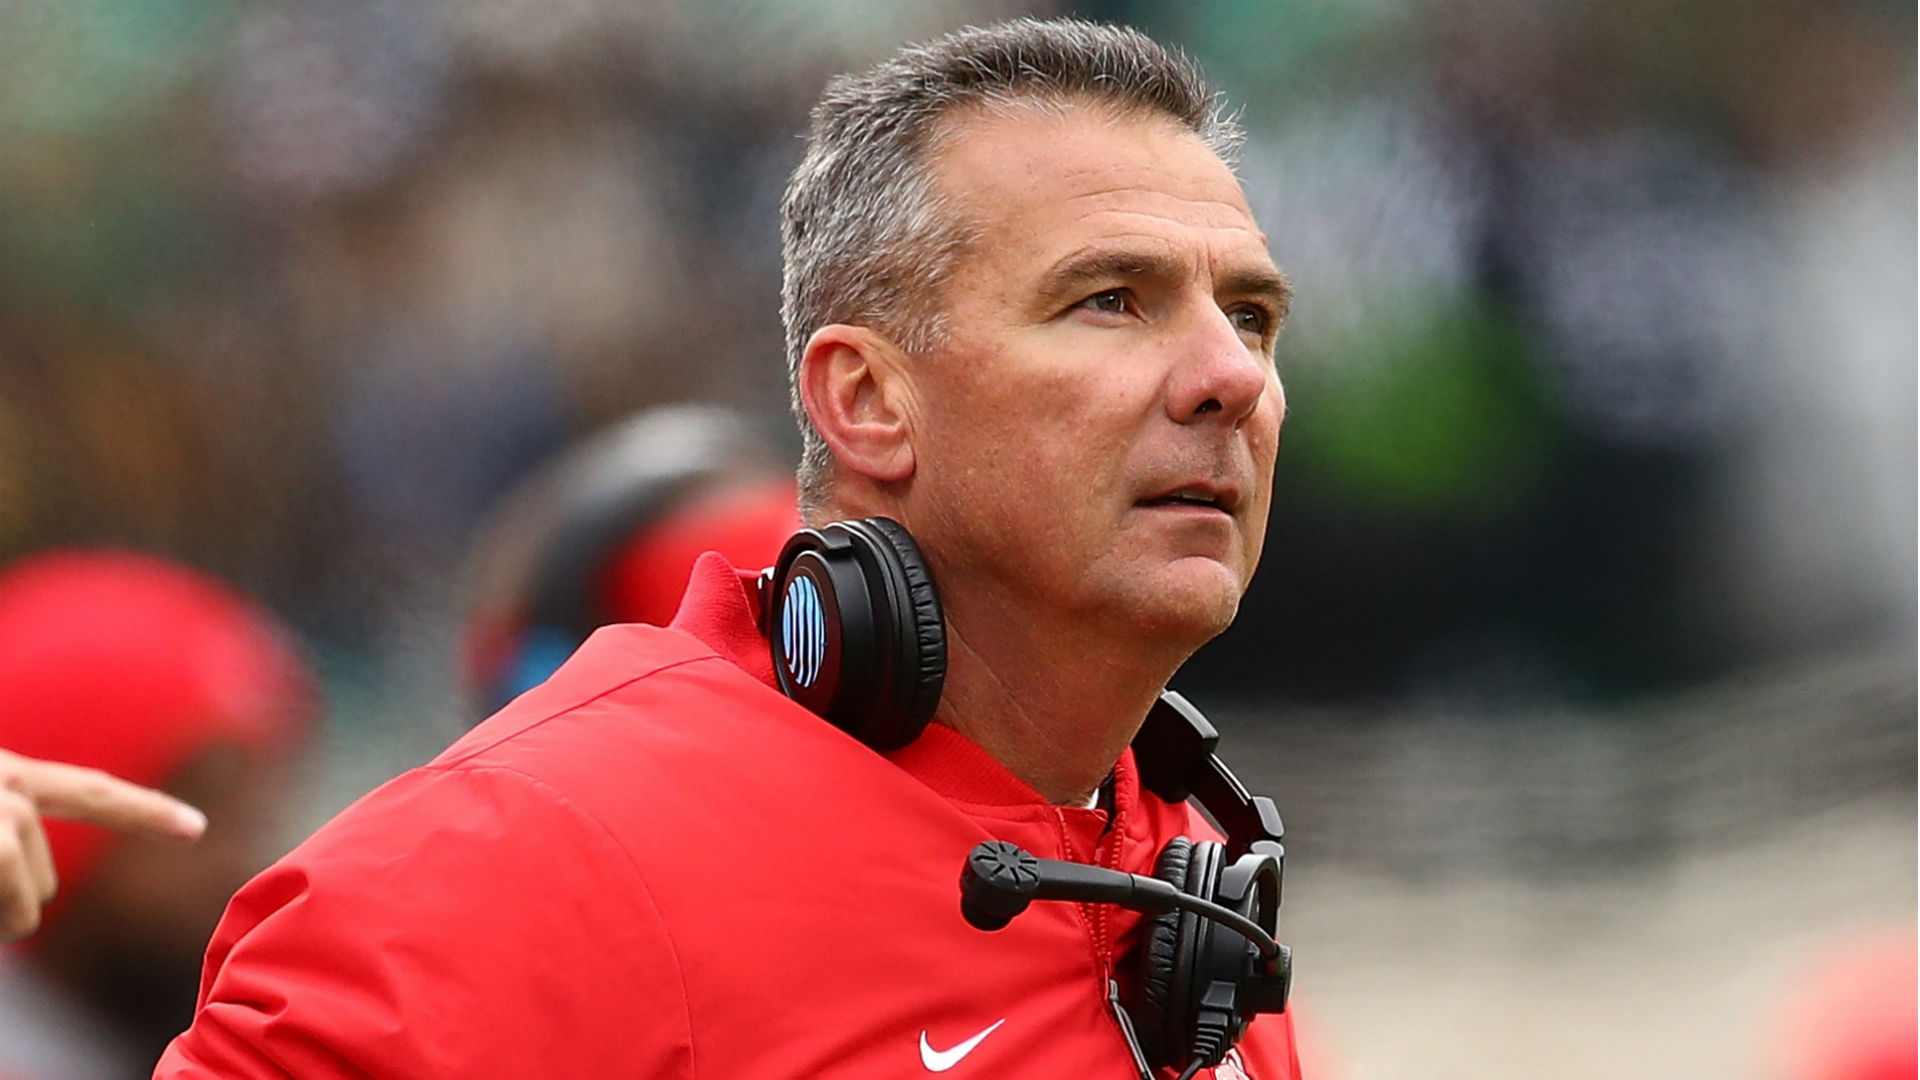 Urban Meyer's best NFL fits: Jaguars, Lions, Chargers offer most attractive situations